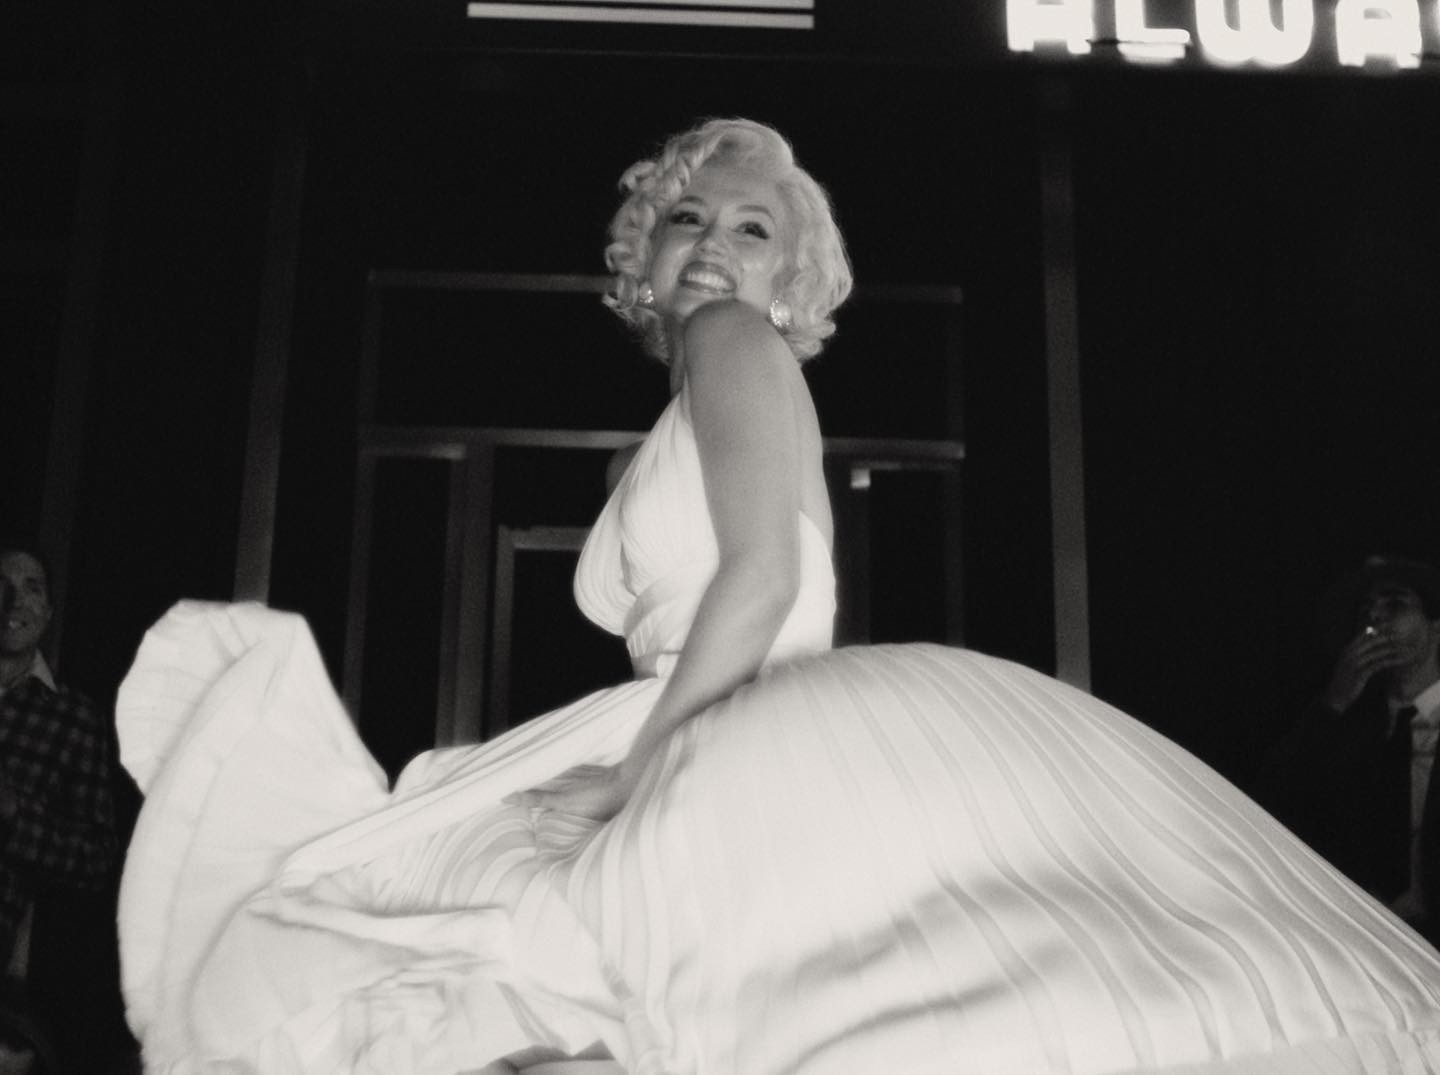 Ana de Armas surprises in photos characterized as Marilyn Monroe for the film (Photo: Reproduction / Instagram)